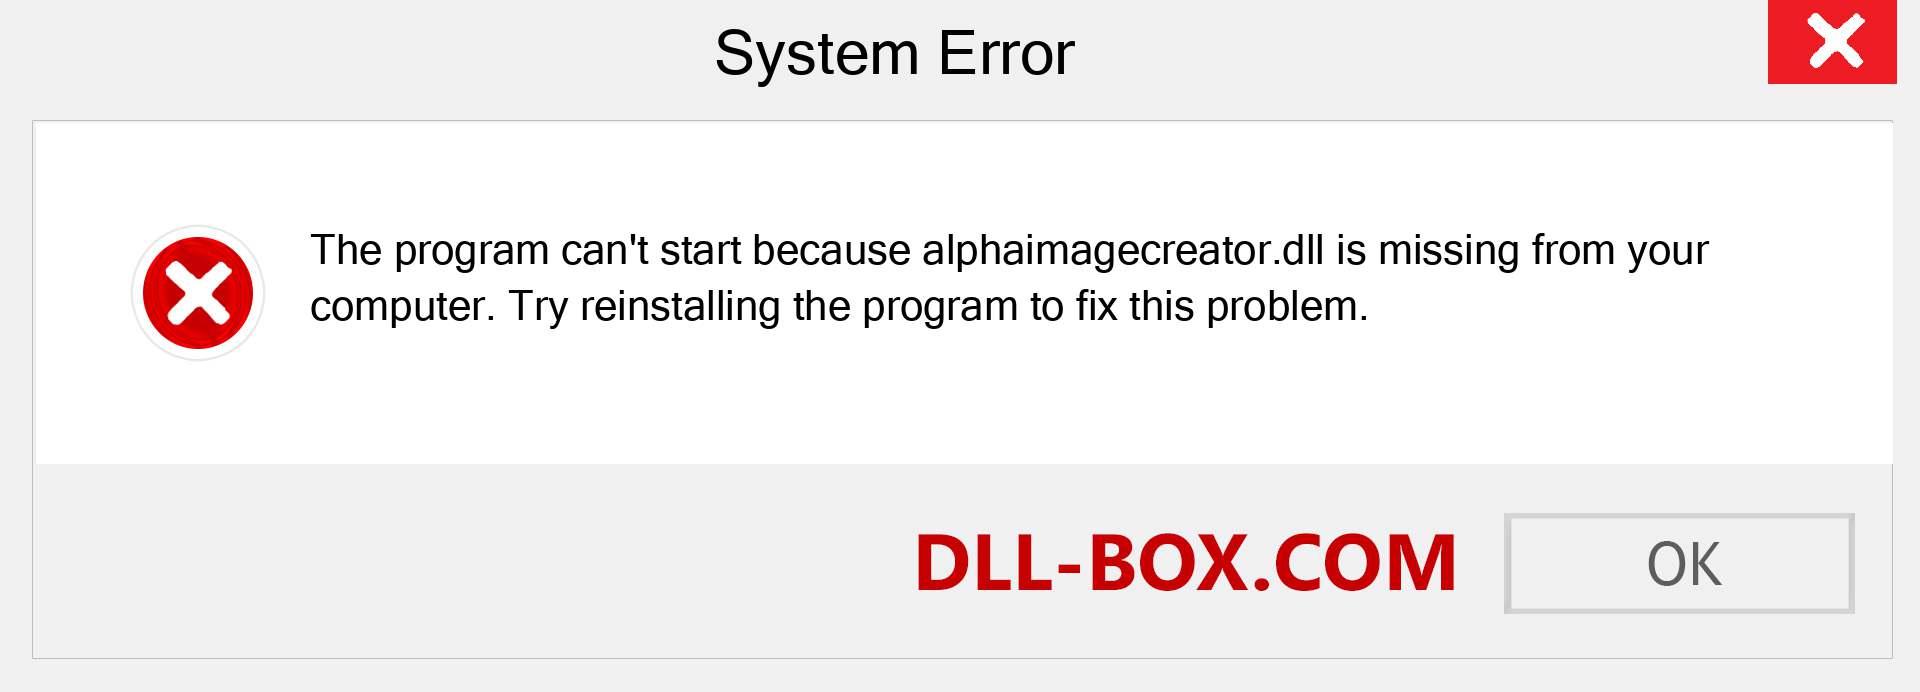  alphaimagecreator.dll file is missing?. Download for Windows 7, 8, 10 - Fix  alphaimagecreator dll Missing Error on Windows, photos, images